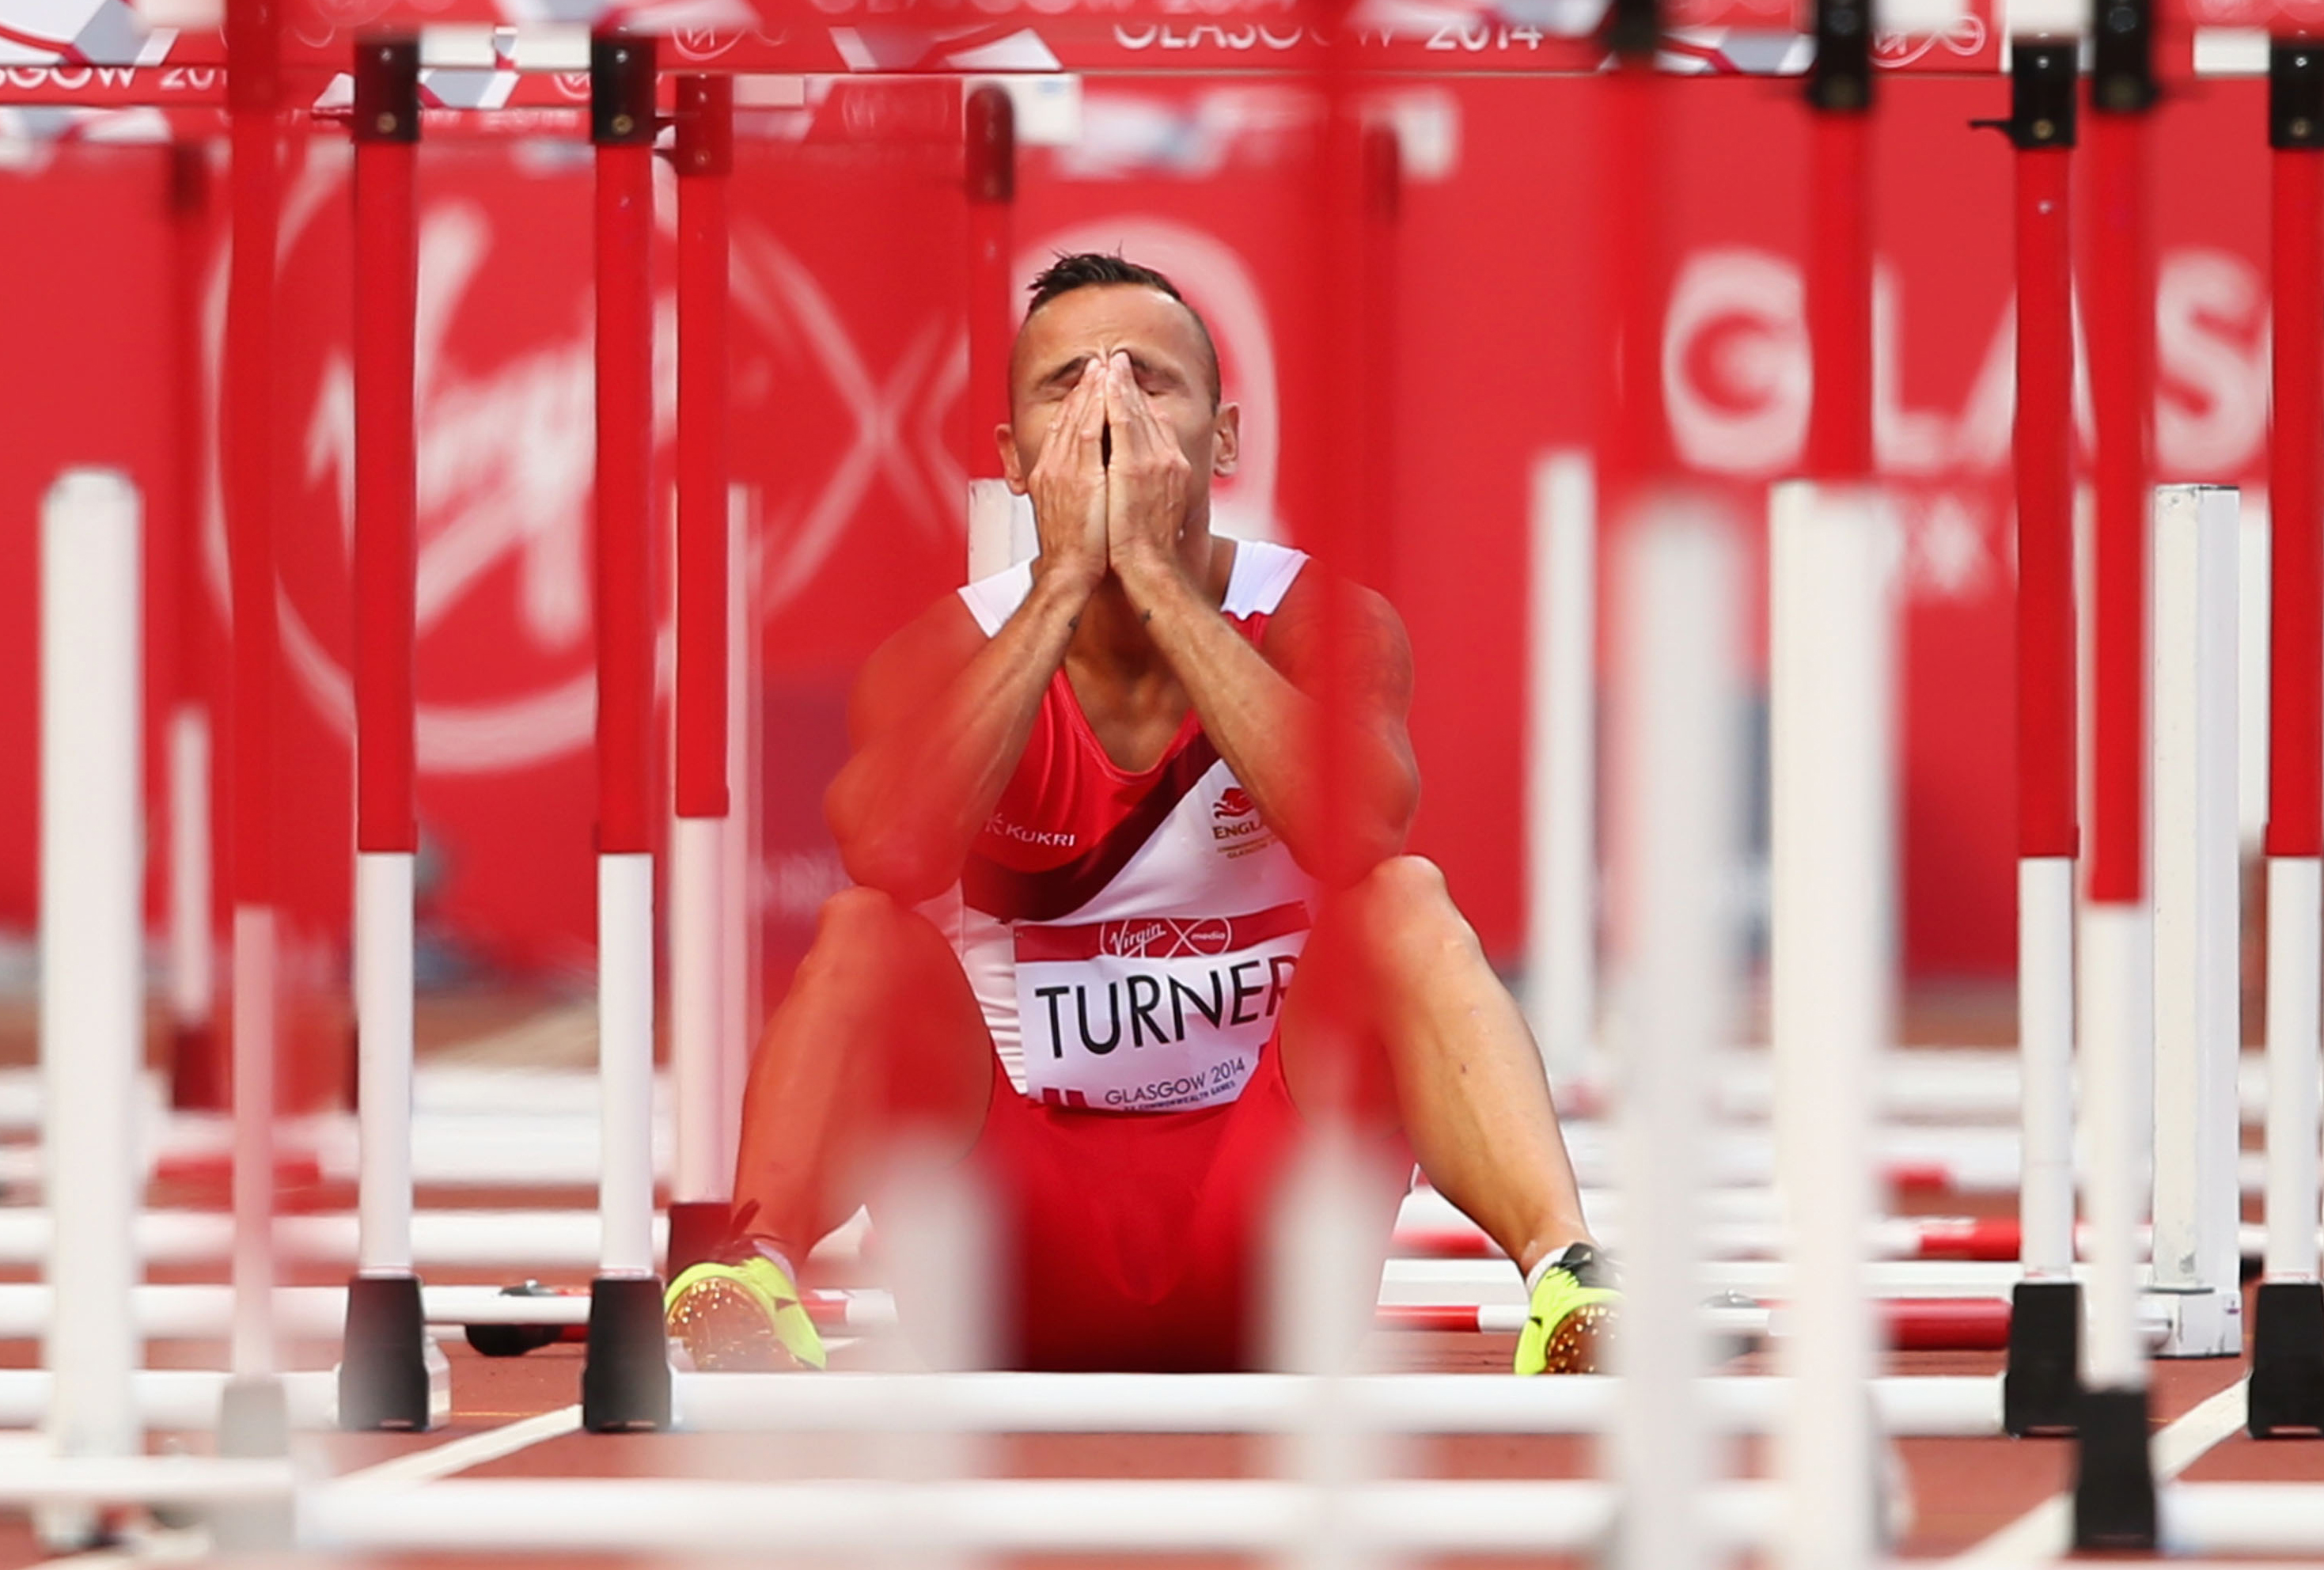 England&#039;s Andy Turner at Glasgow 2014 Commonwealth Games